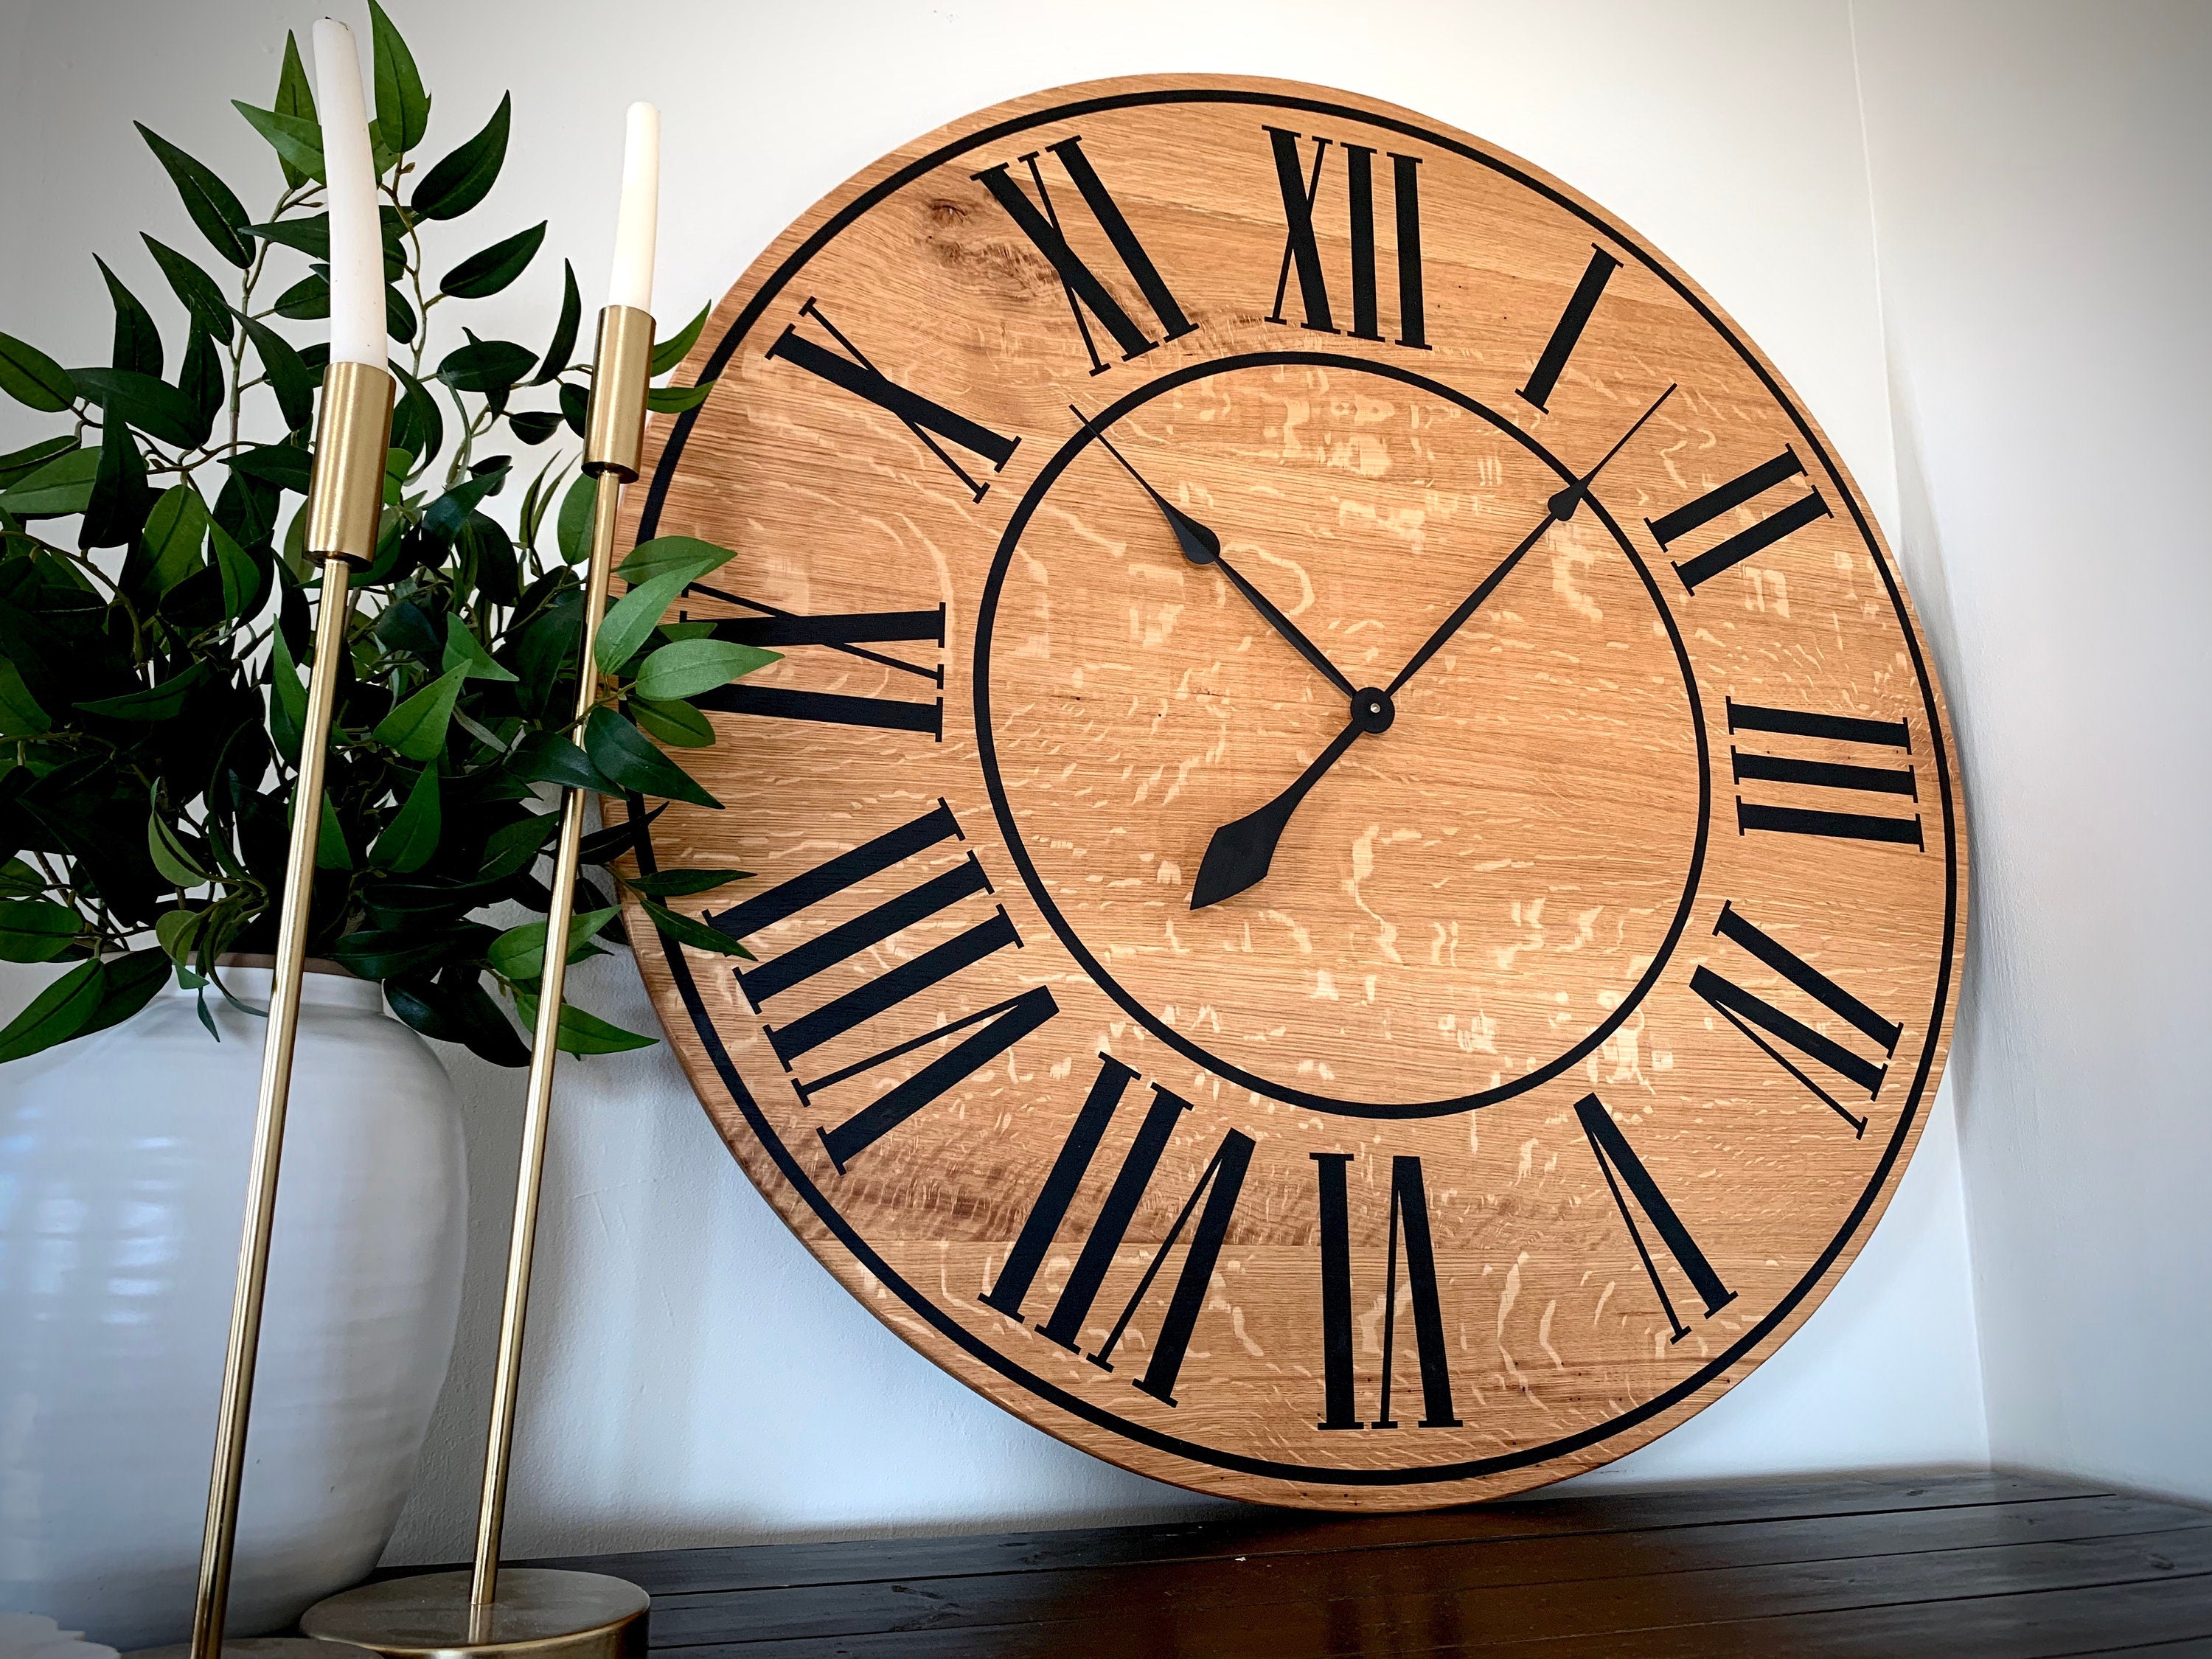 Large Quartersawn White Oak Wall Clock with Black Lines and Roman Numerals